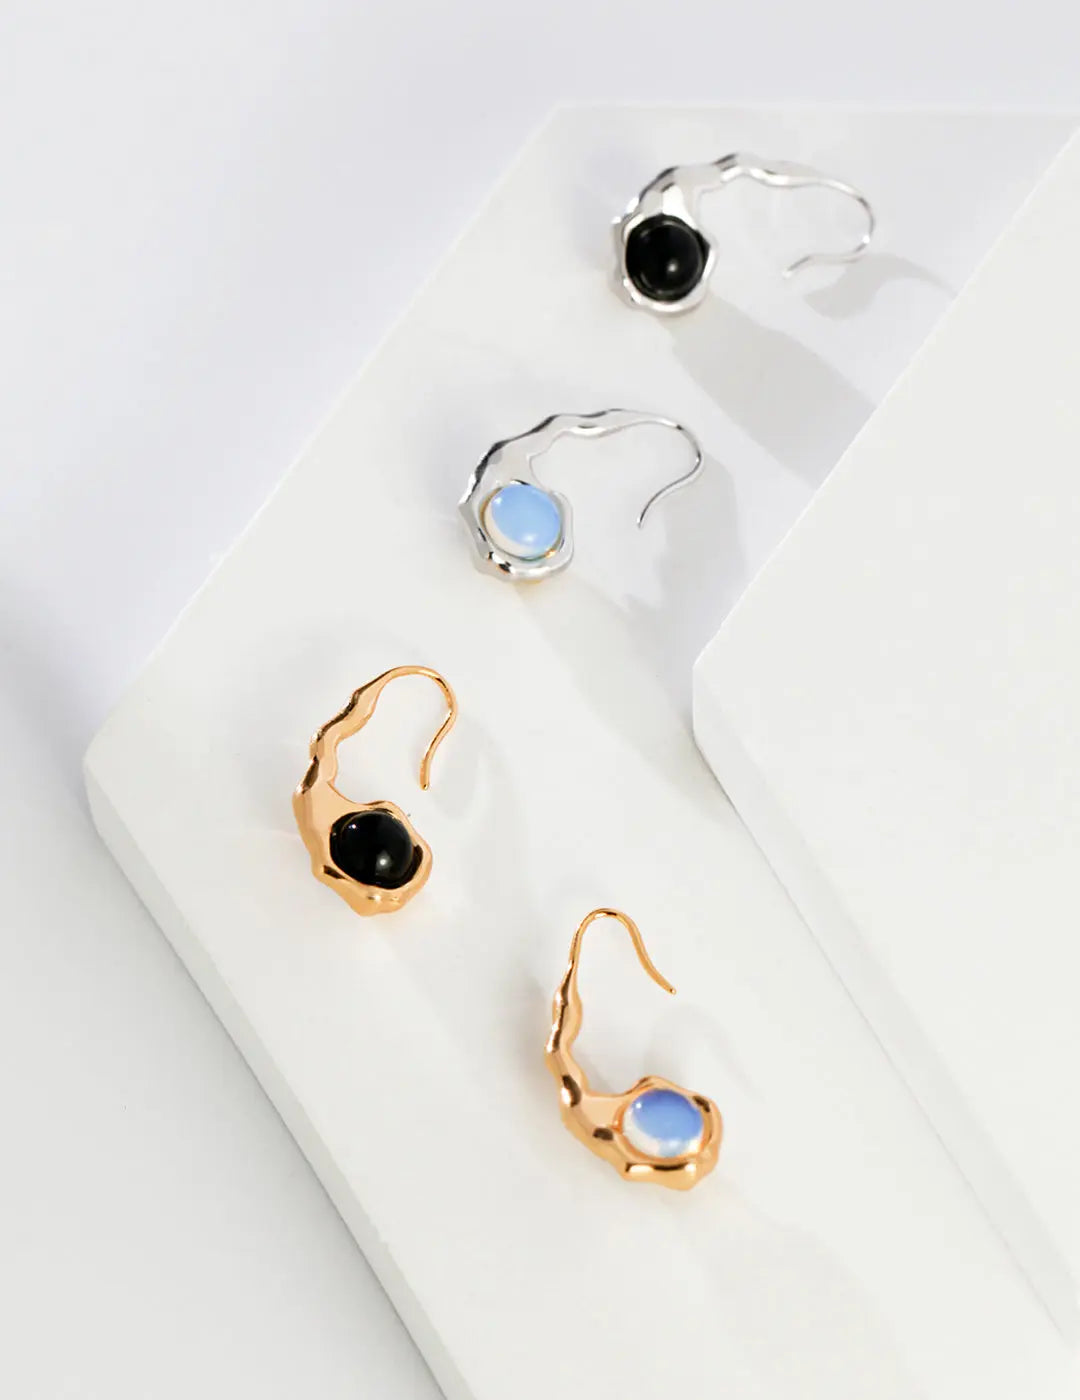 S925 silver in gold vermeil earrings with Opal stone Agate Stone 